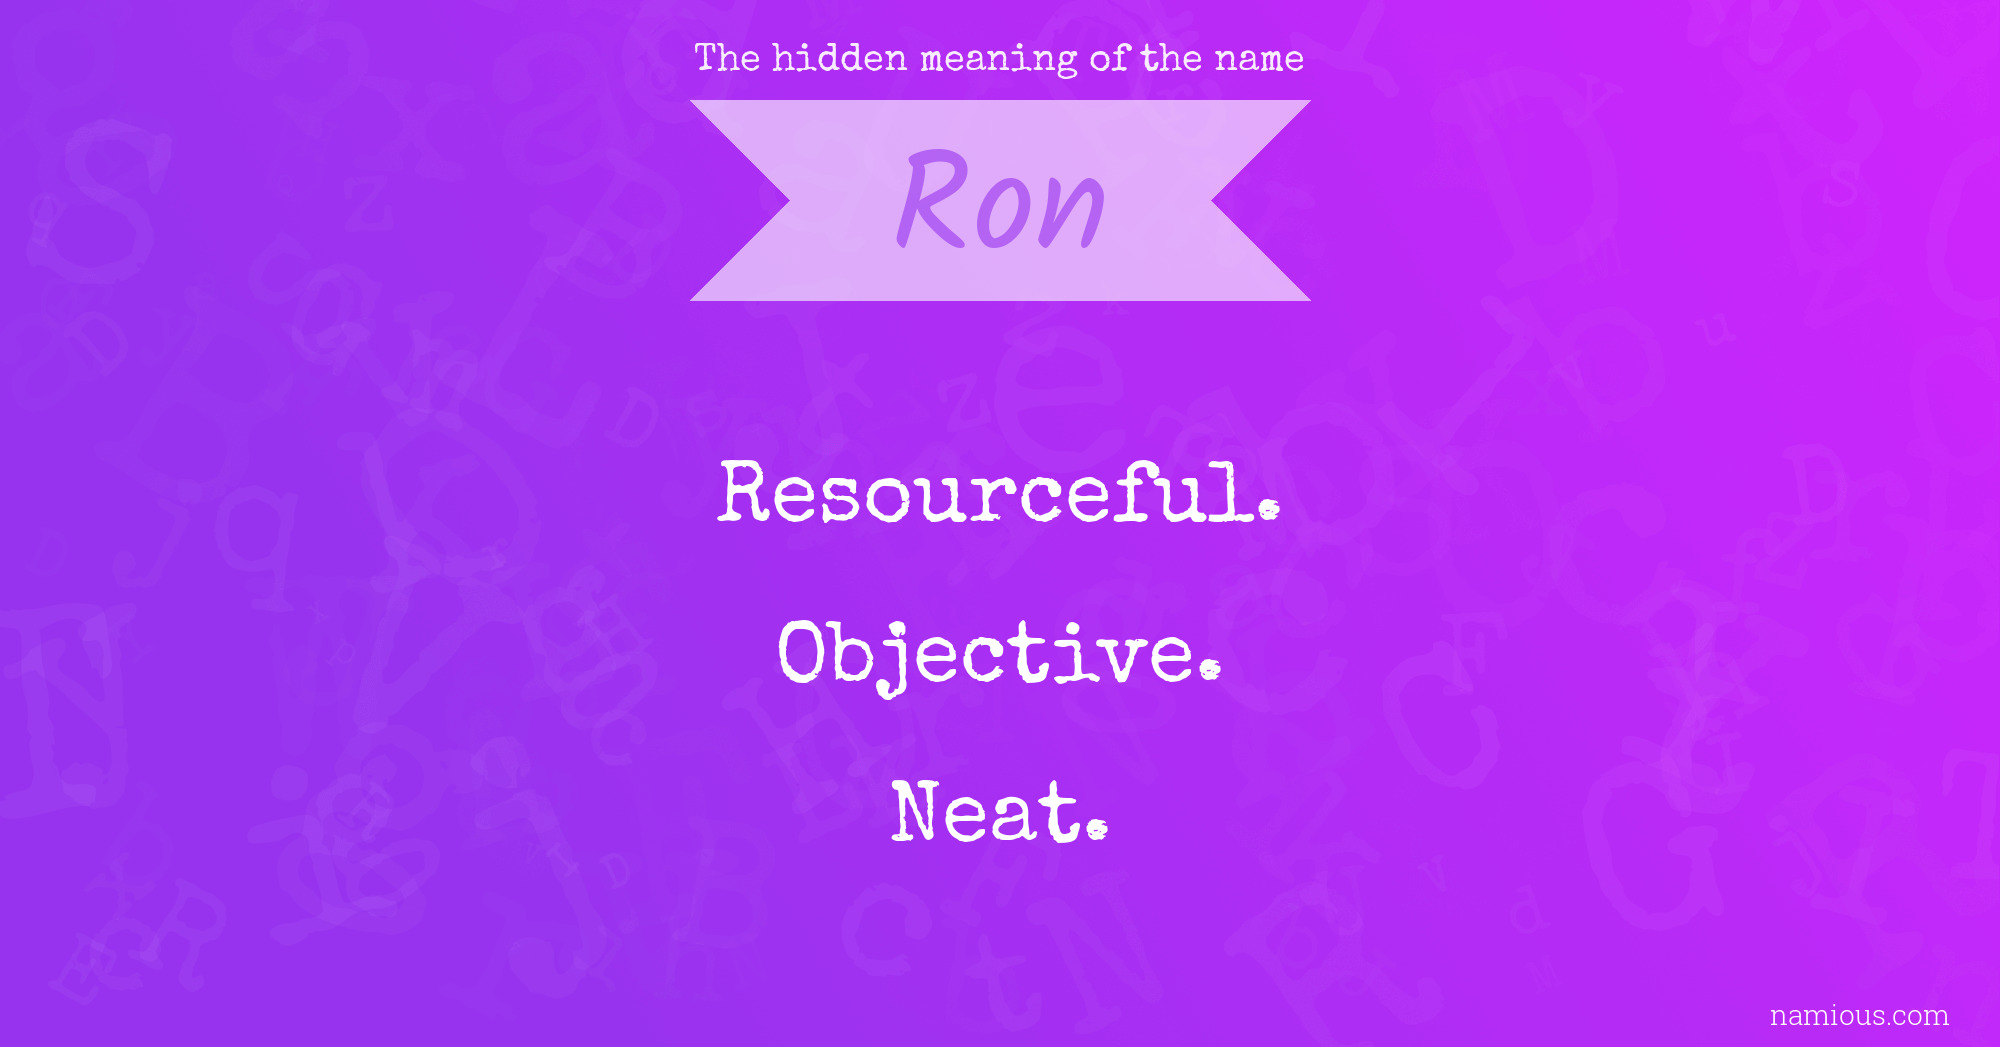 The hidden meaning of the name Ron